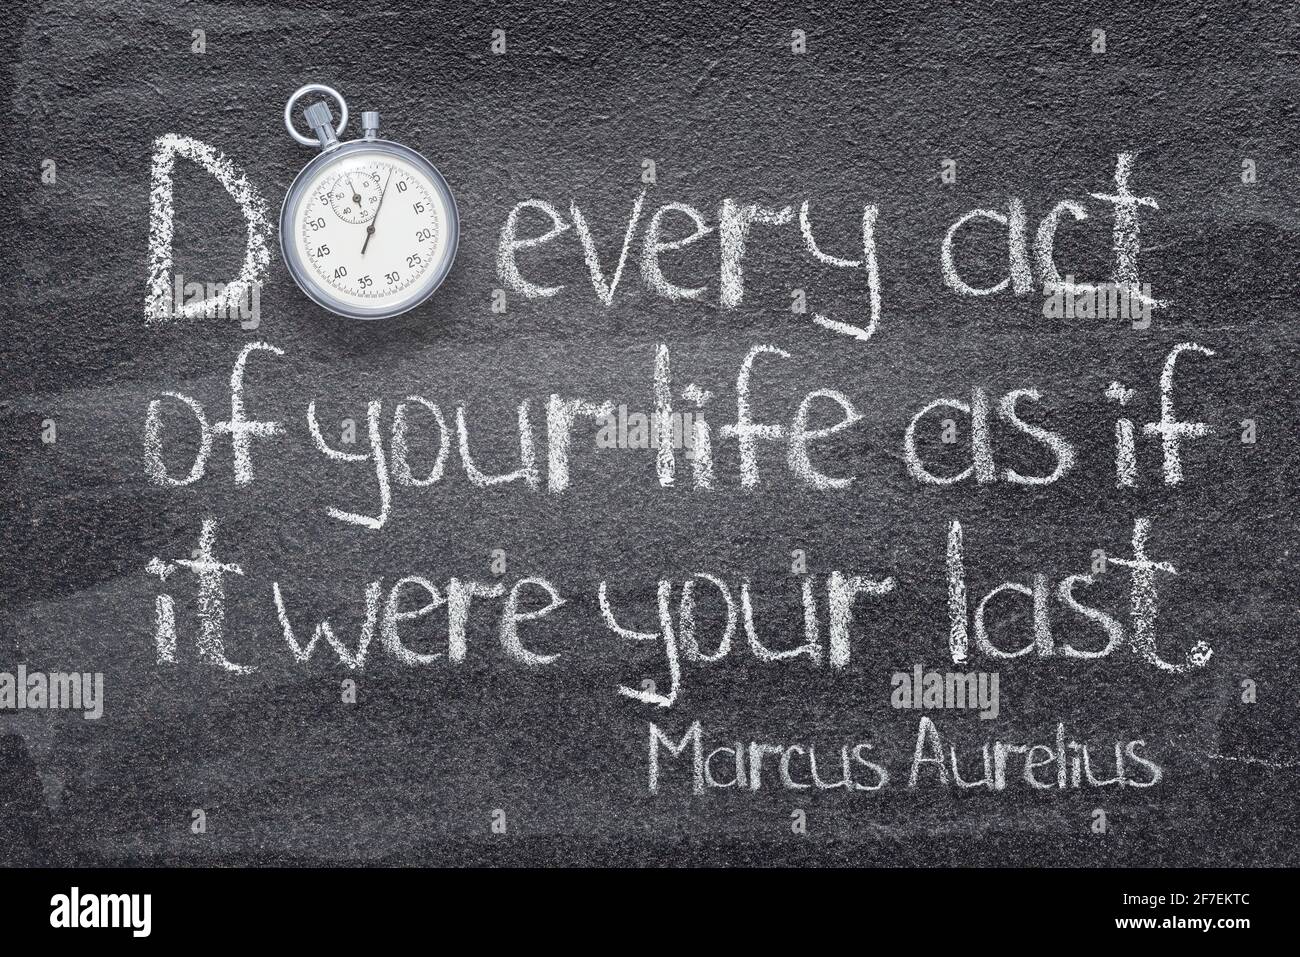 Do every act of your life as if it were your last - ancient Roman philosopher Marcus Aurelius concept quote written on chalkboard Stock Photo